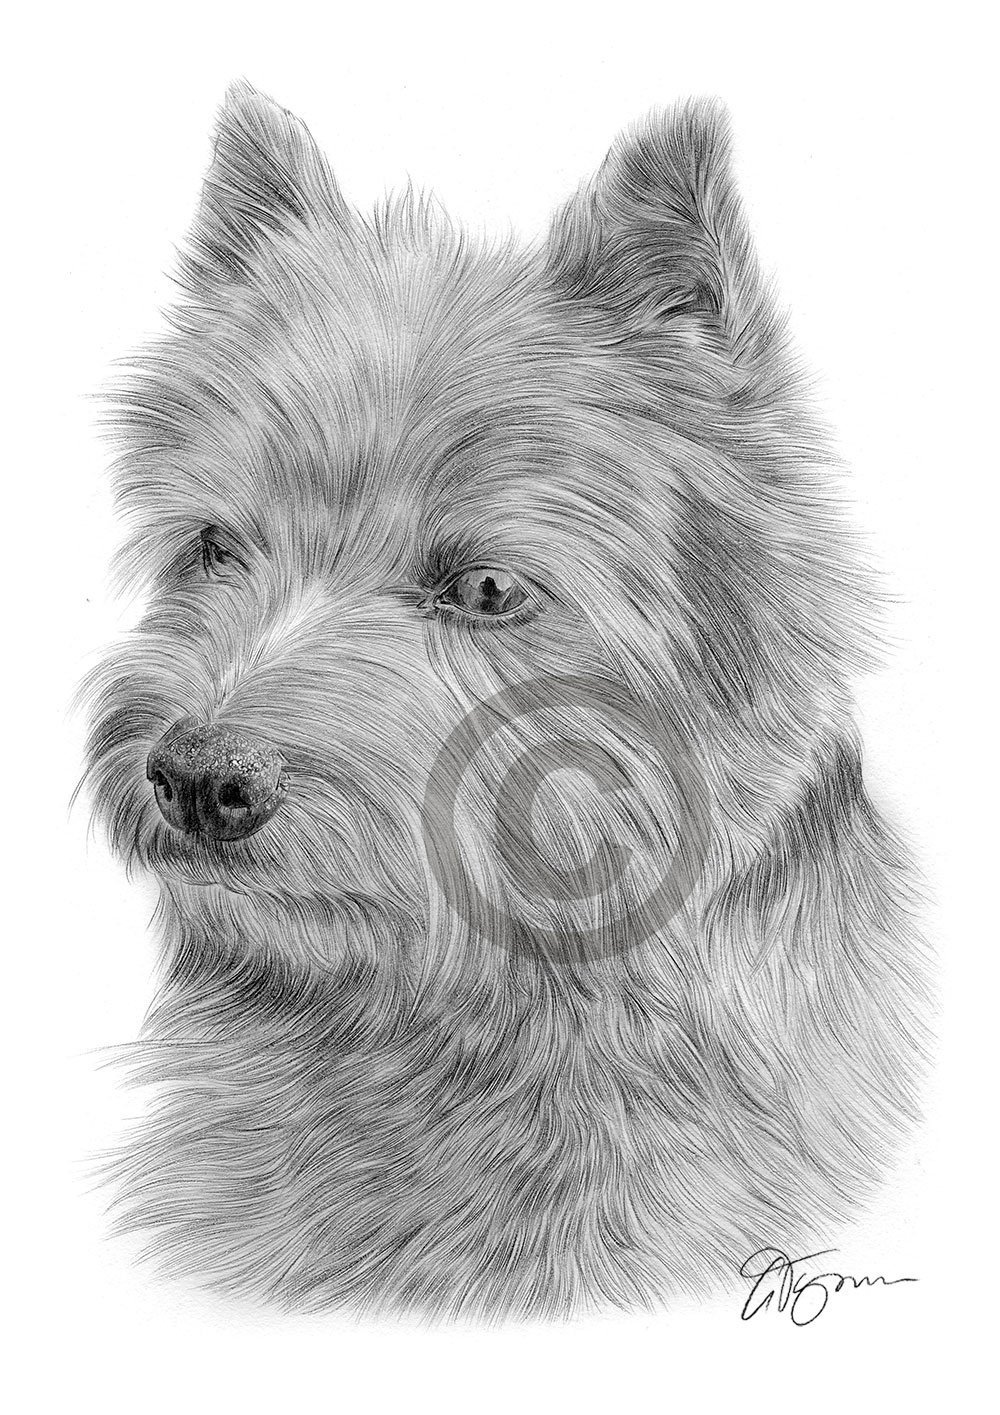 Pencil drawing of a Norwich terrier by artist Gary Tymon